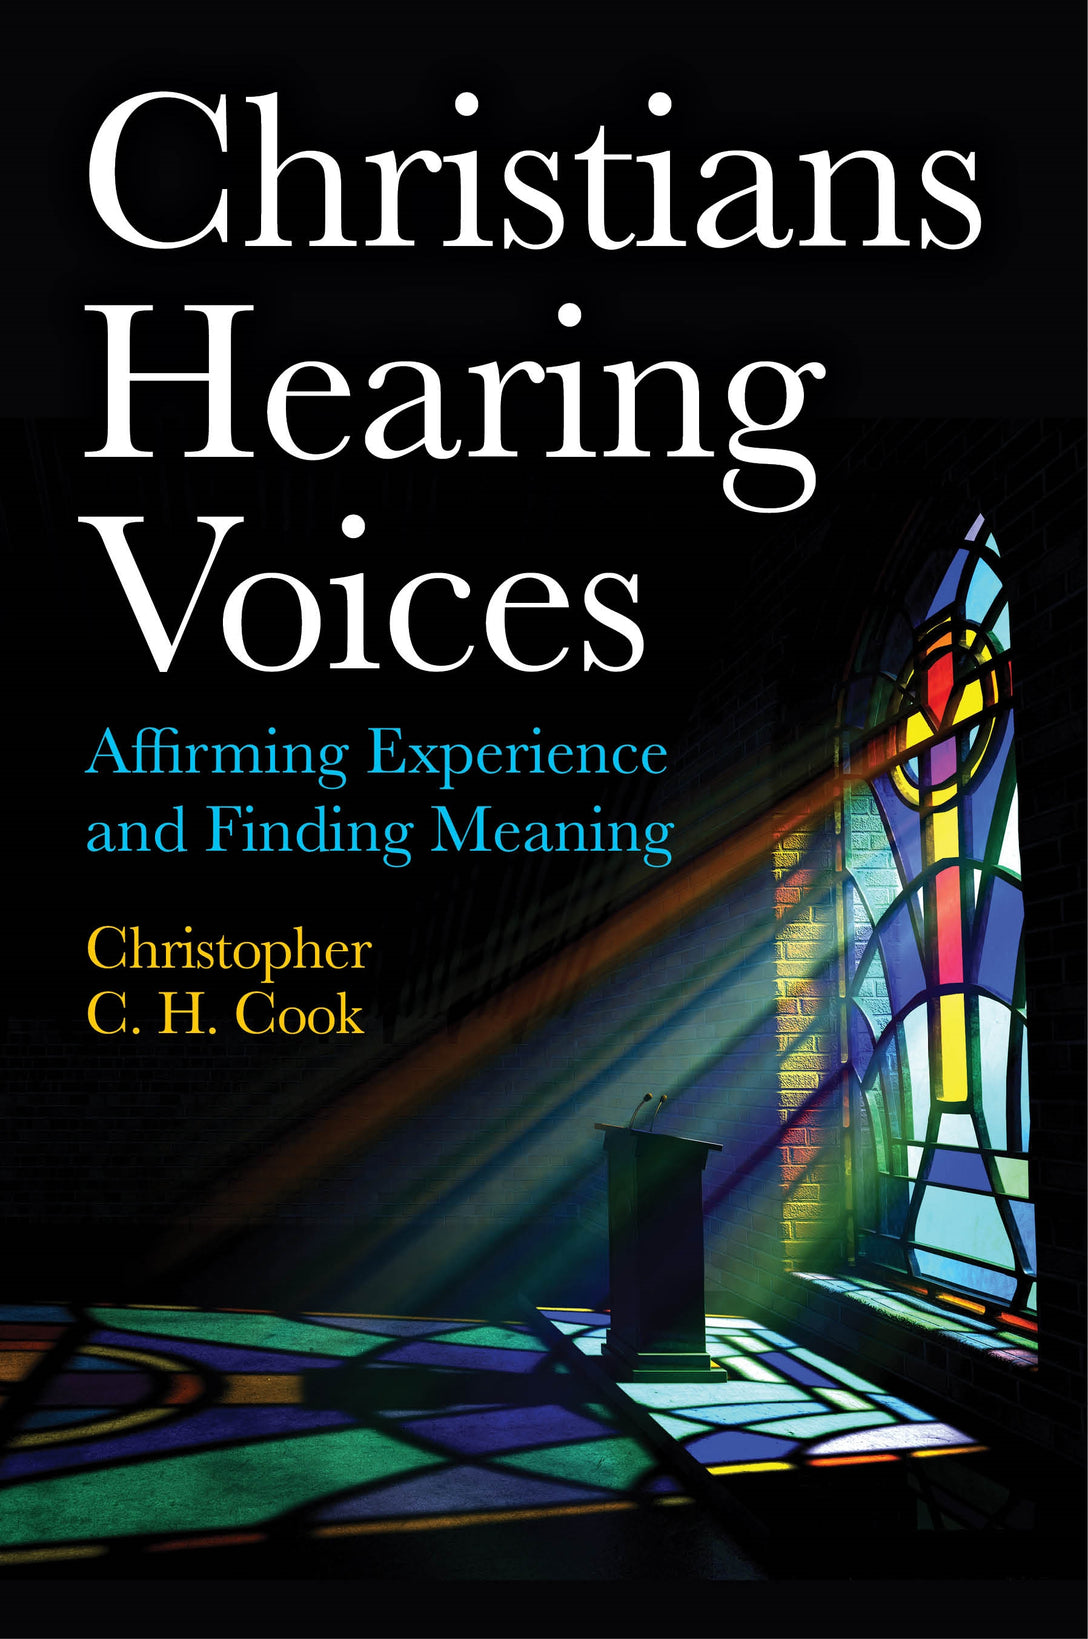 Christians Hearing Voices by Christopher C. H. Cook